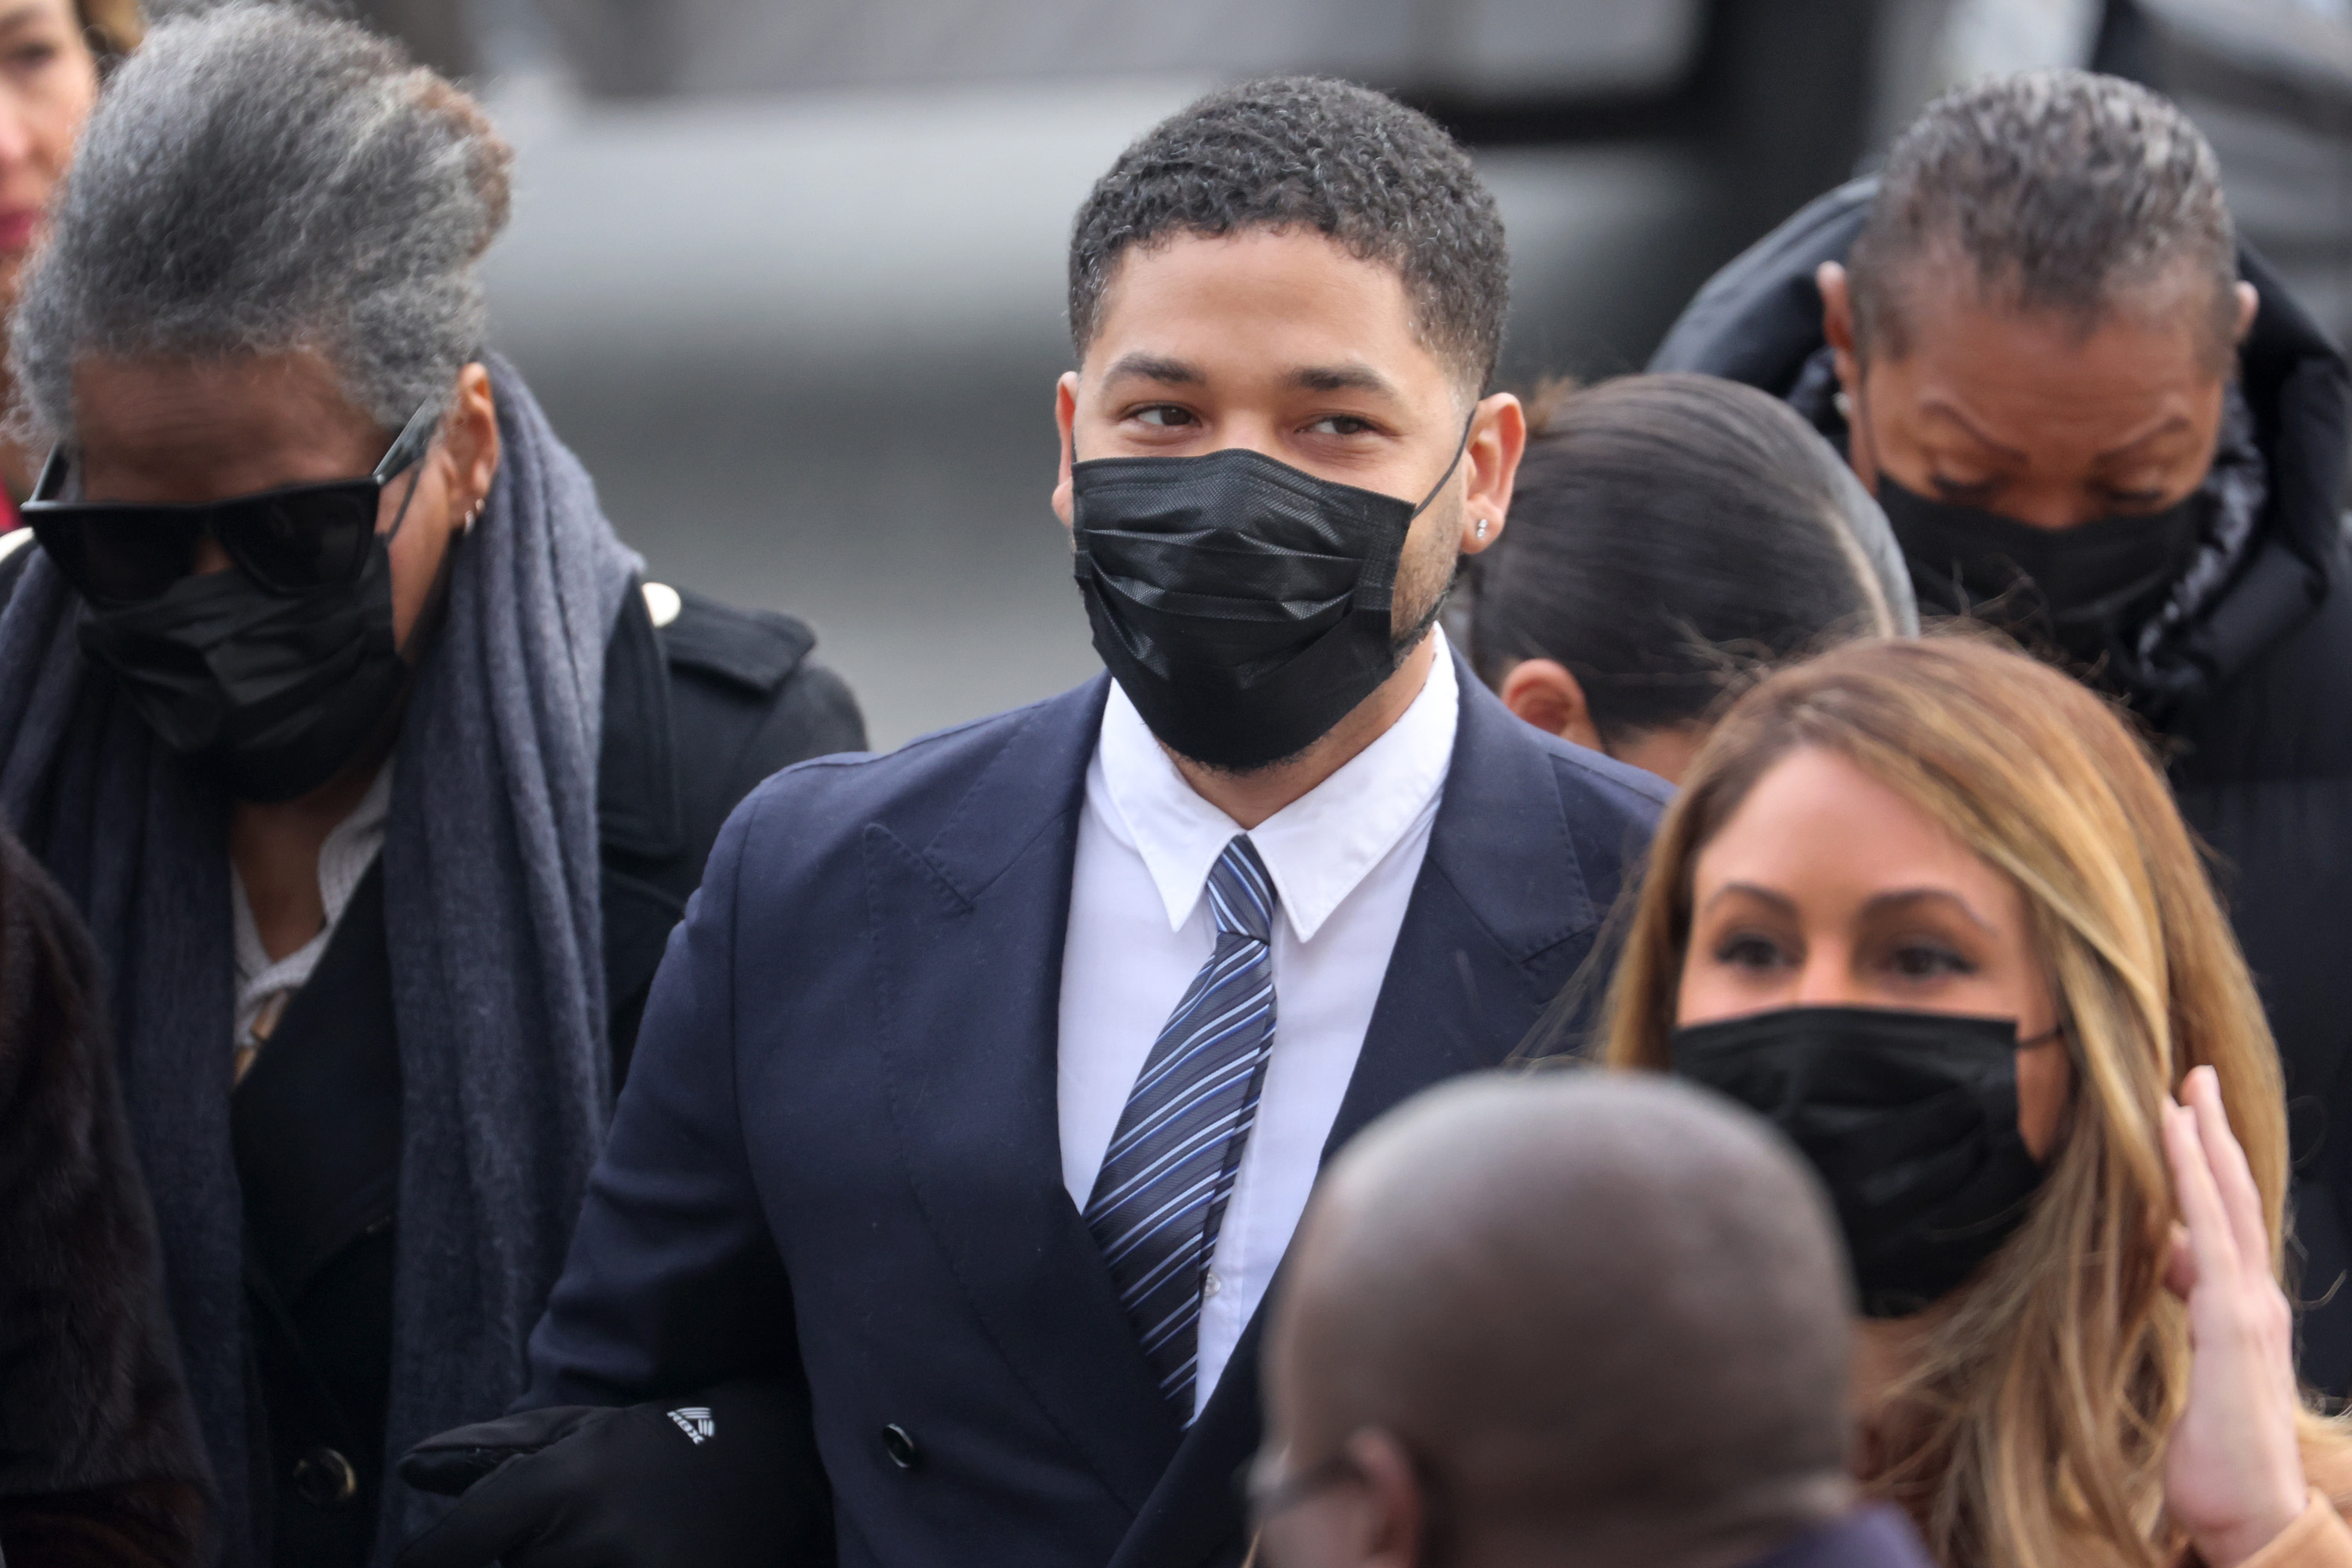 Jussie Smollett arrives at the Leighton Courts Building for the start of jury selection in his trial on November 29, 2021 in Chicago, Illinois.